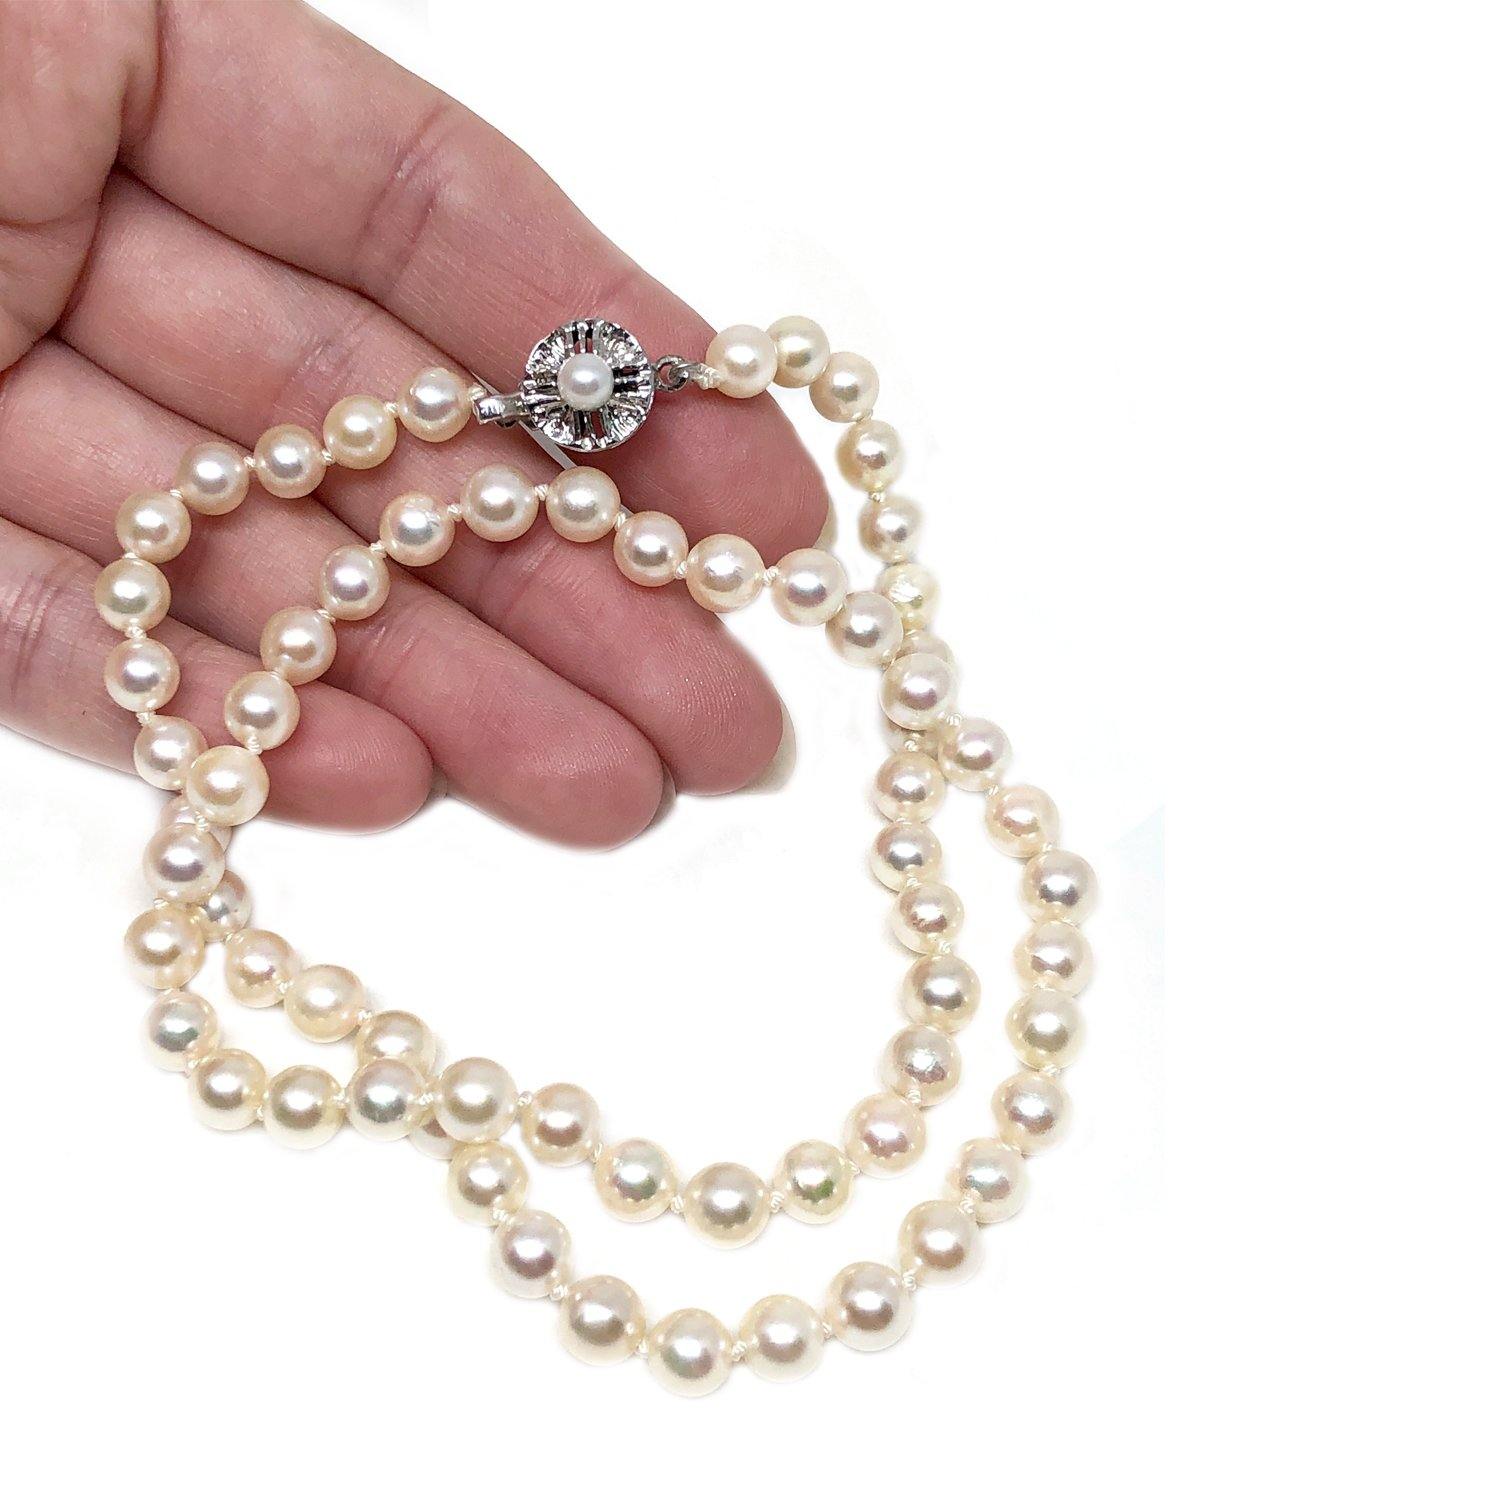 Mid-Century Retro Japanese Saltwater Cultured Akoya Pearl Necklace - Sterling Silver 19 Inch